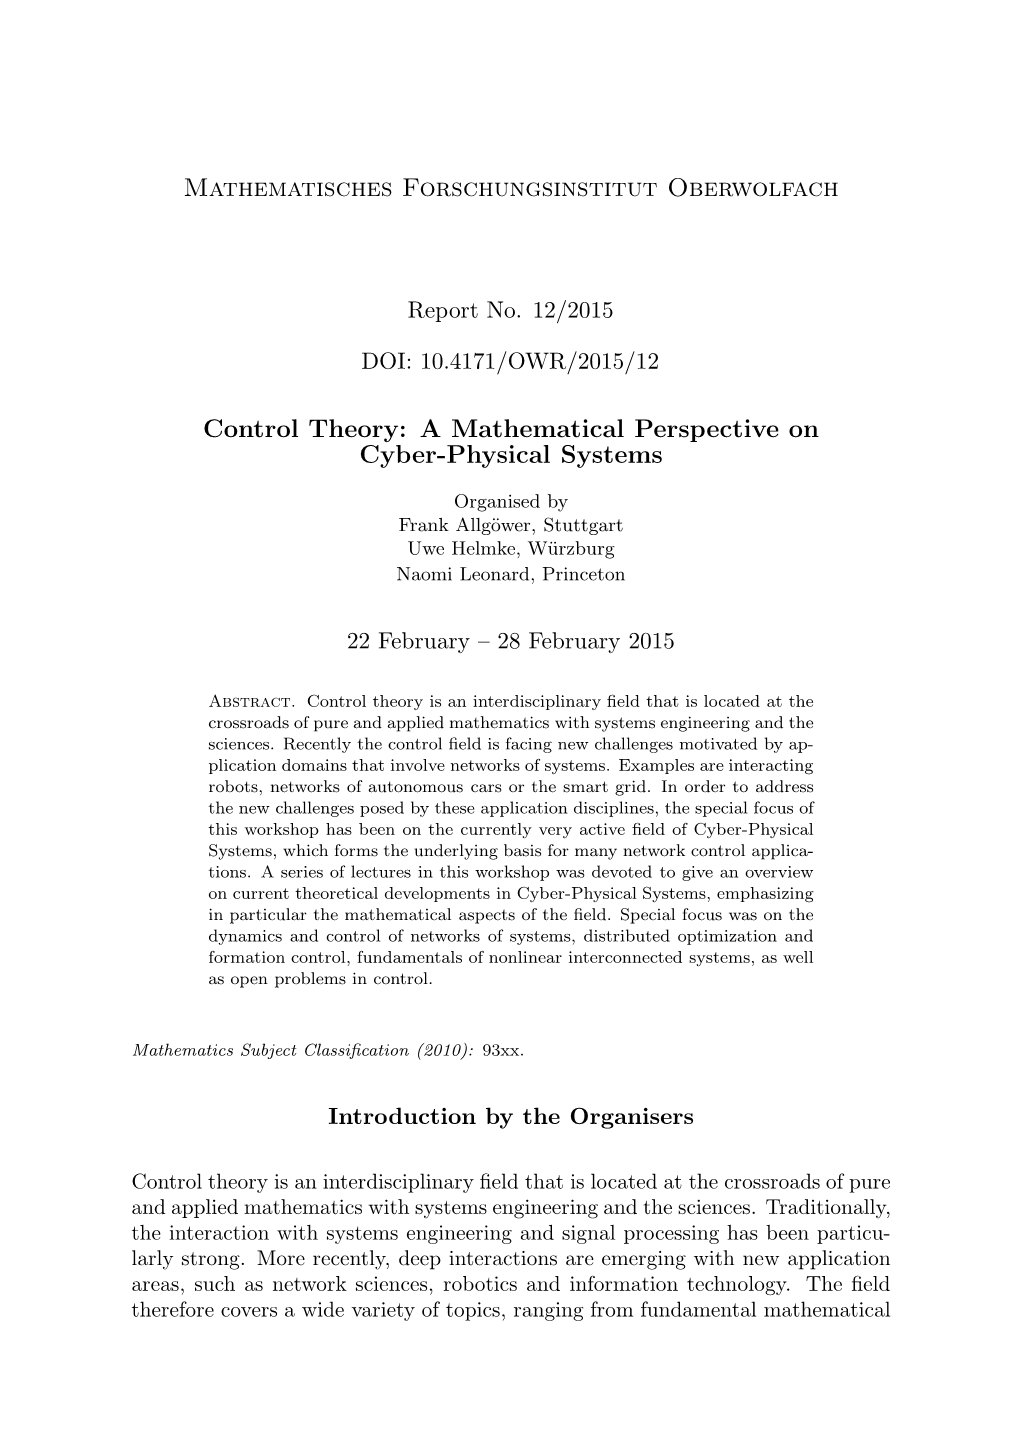 A Mathematical Perspective on Cyber-Physical Systems